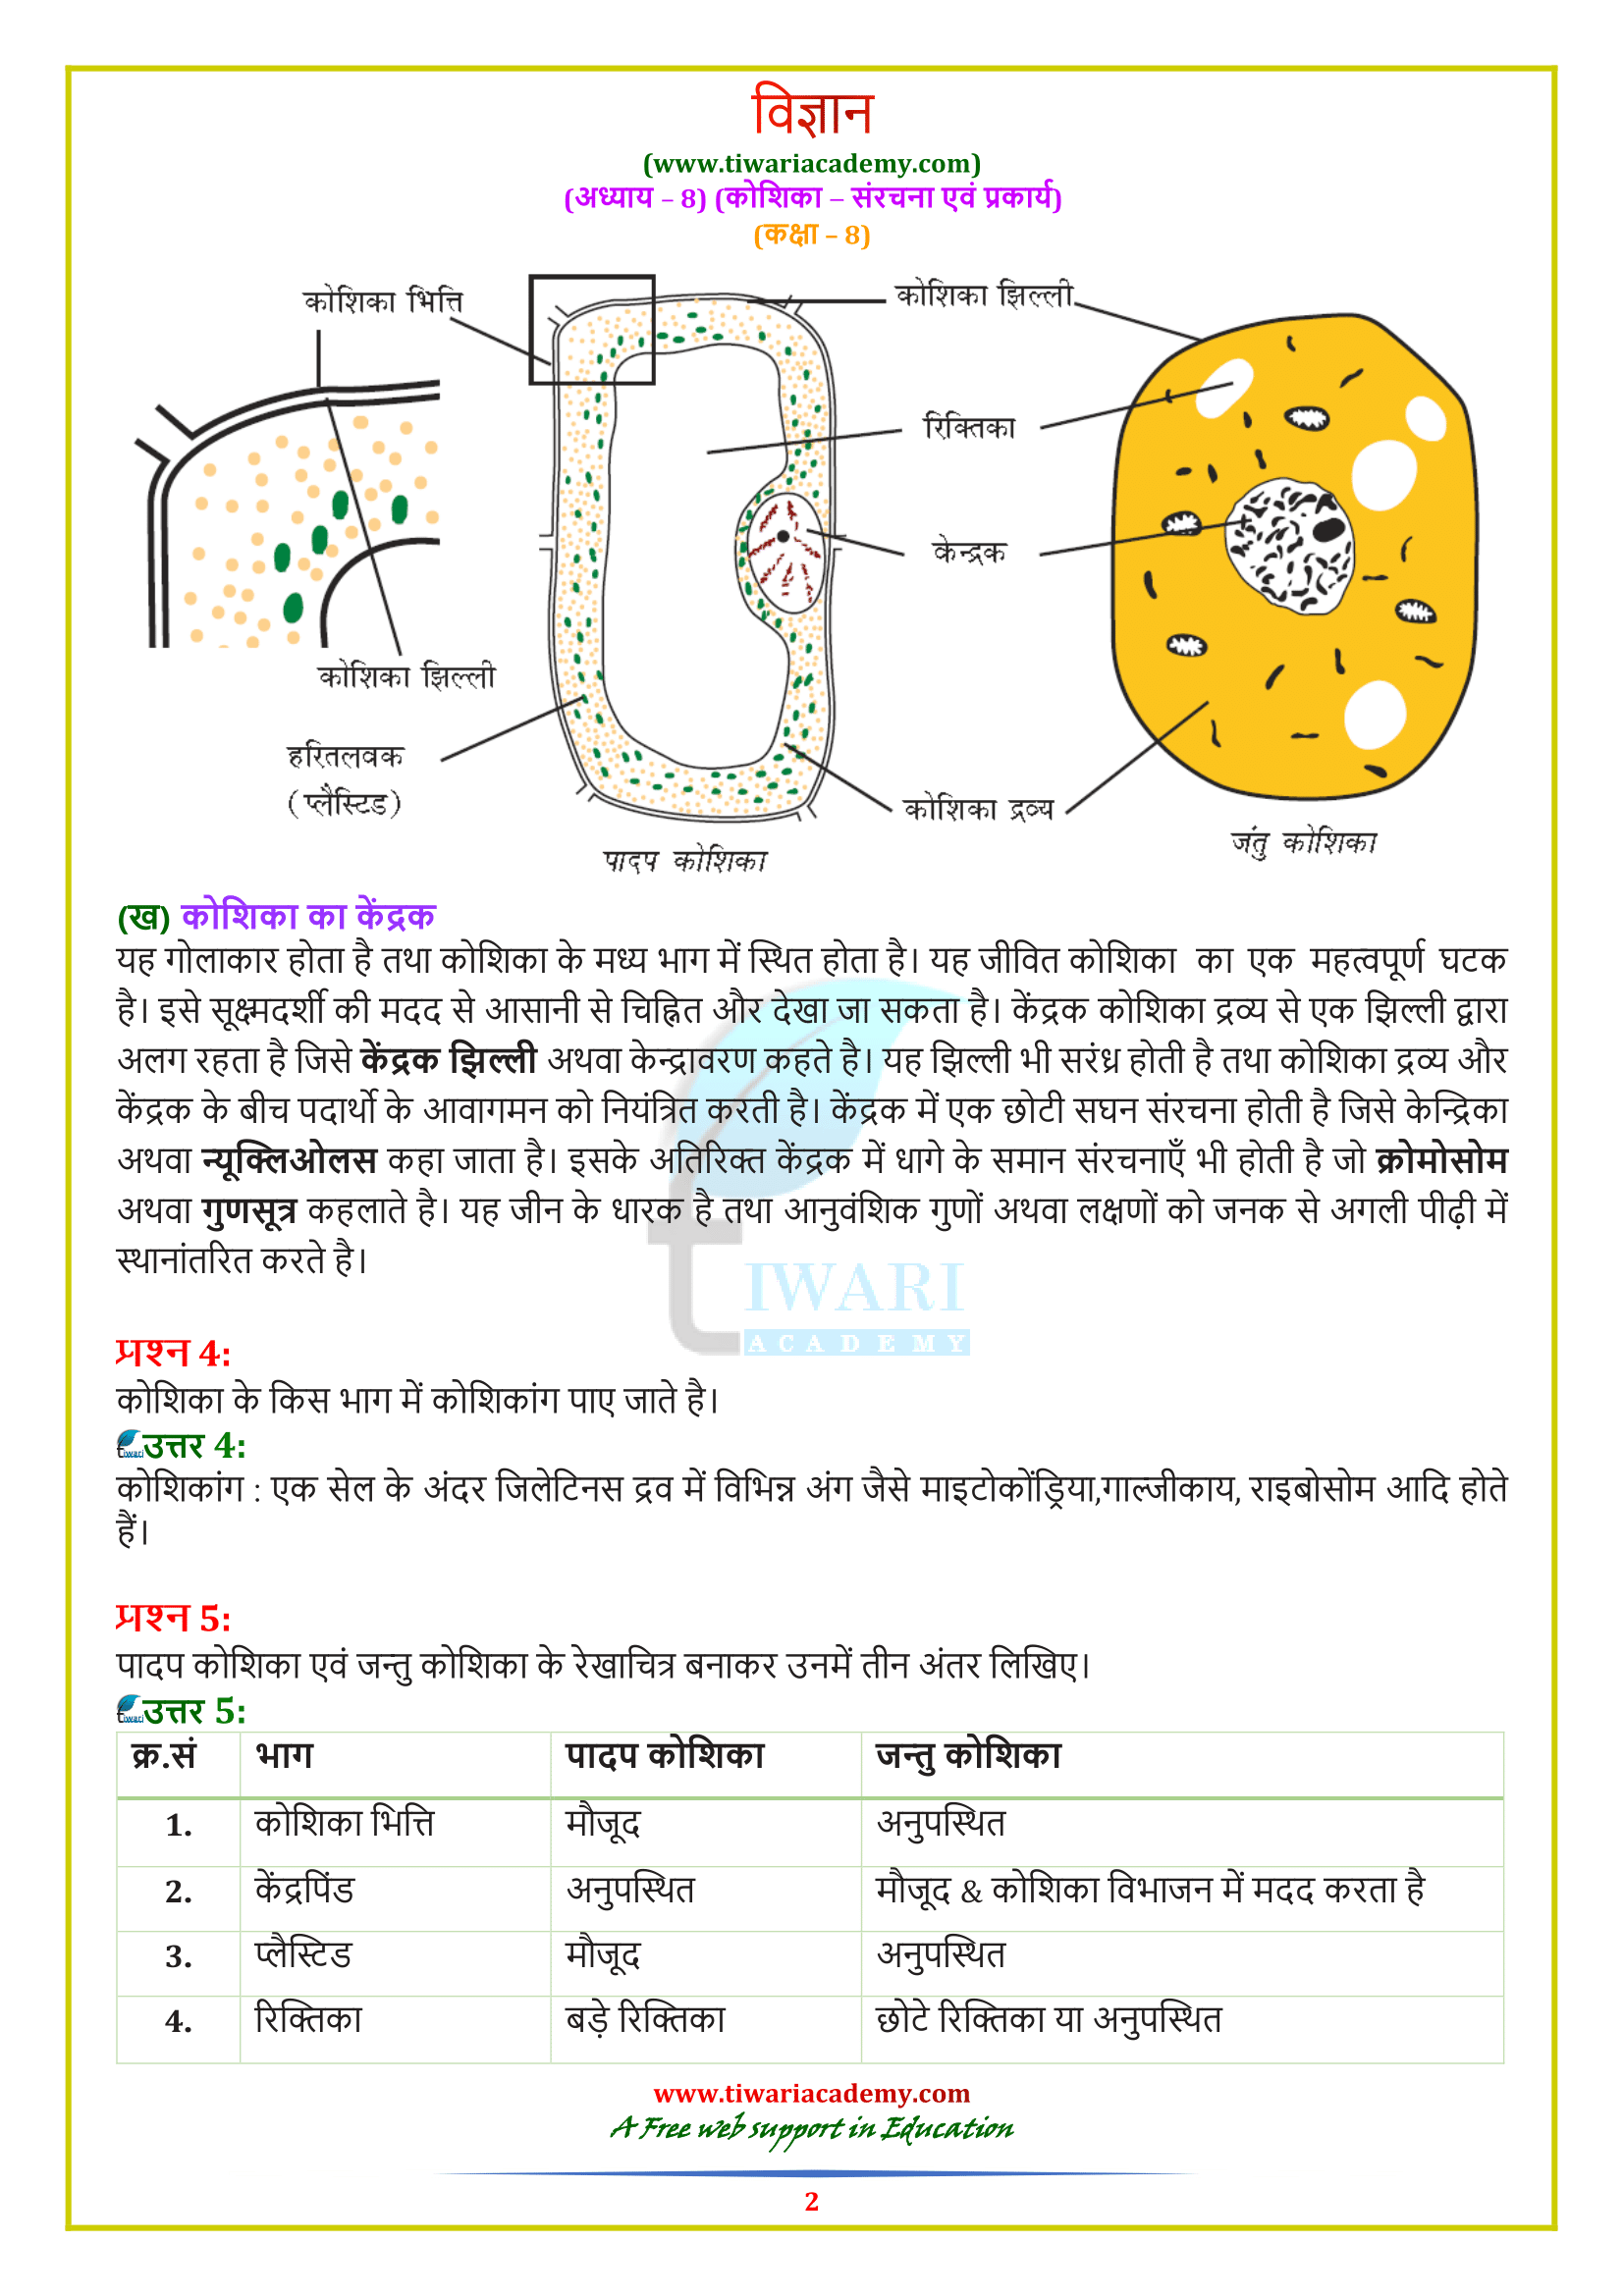 NCERT Solutions for Class 8 Science Chapter 8 Hindi English 2022-2023.